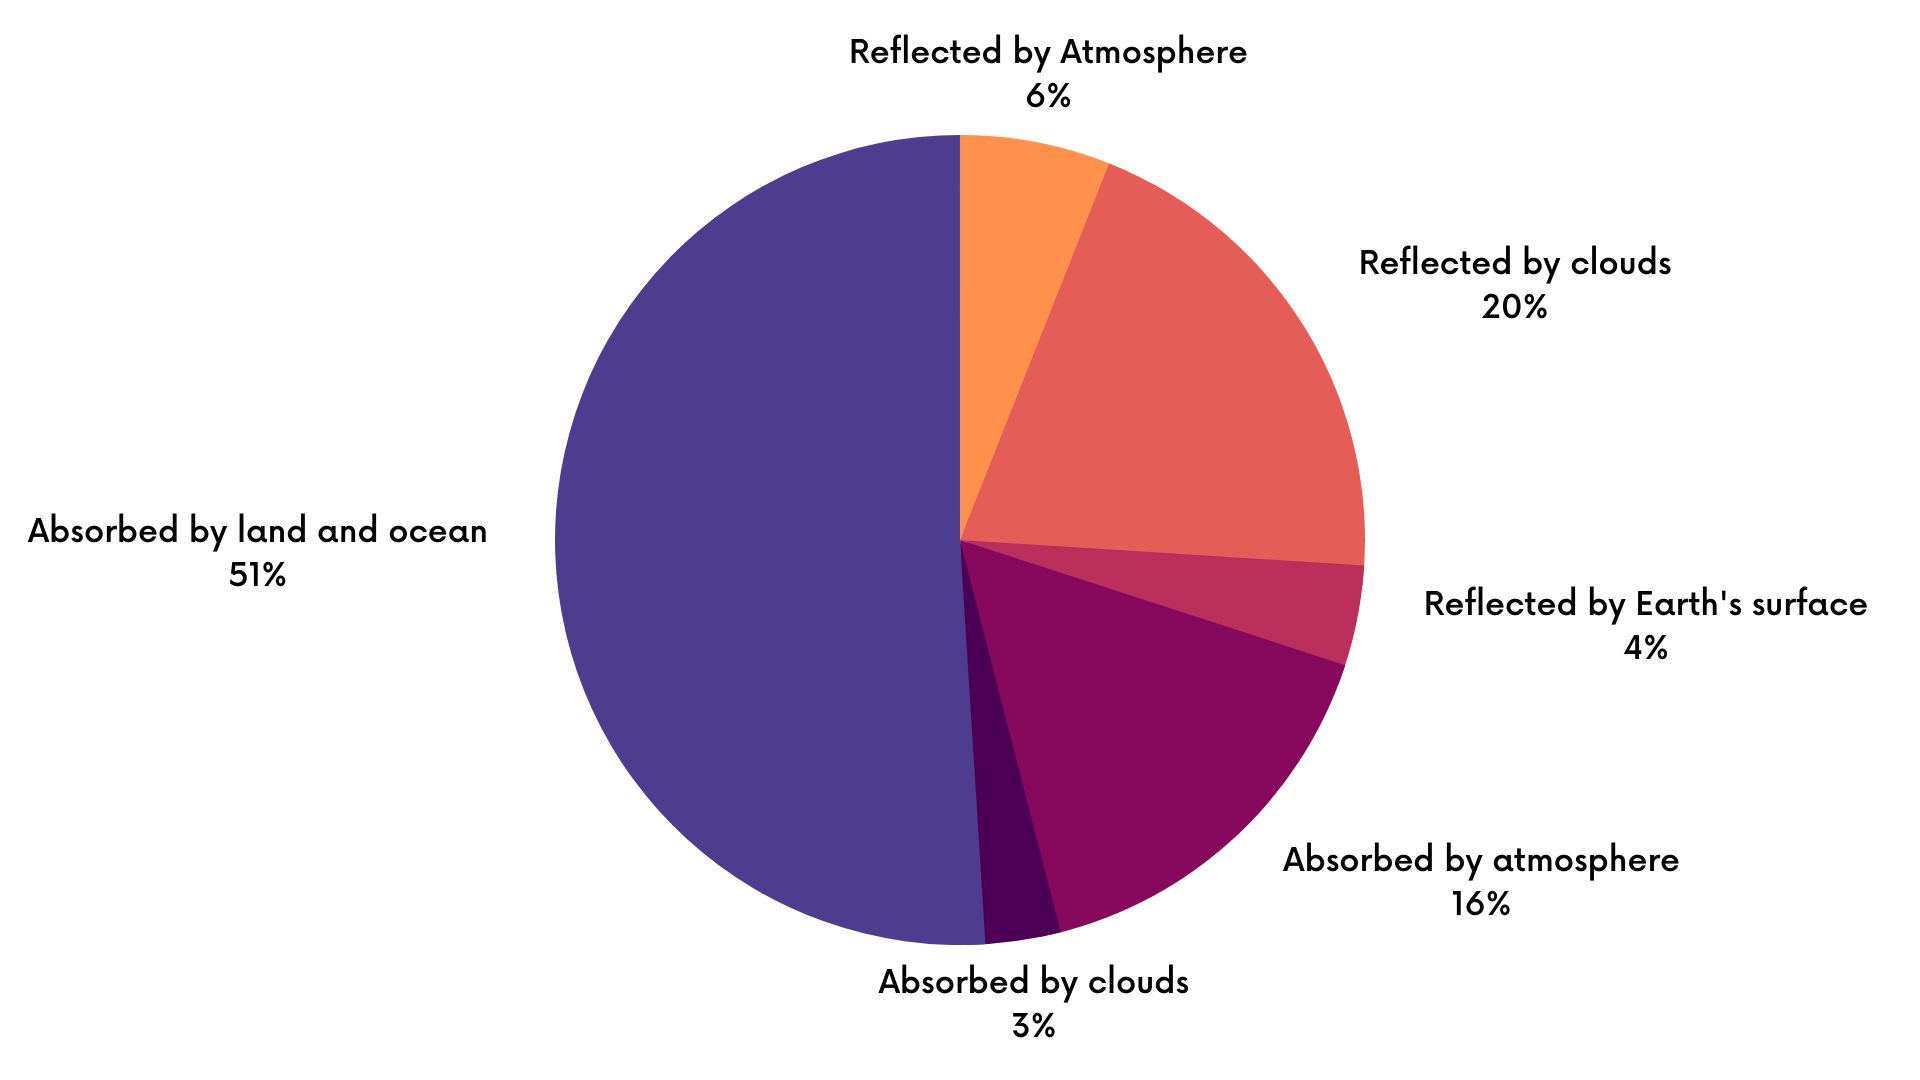 Incoming Solar Radiation Circle Graph showing 6% reflected by atmosphere, 20% reflected by clouds, 4% reflected by Earth's surface, 16% absorbed by the atmosphere, 3% absorbed by clouds and 51% absorbed by land and oceans